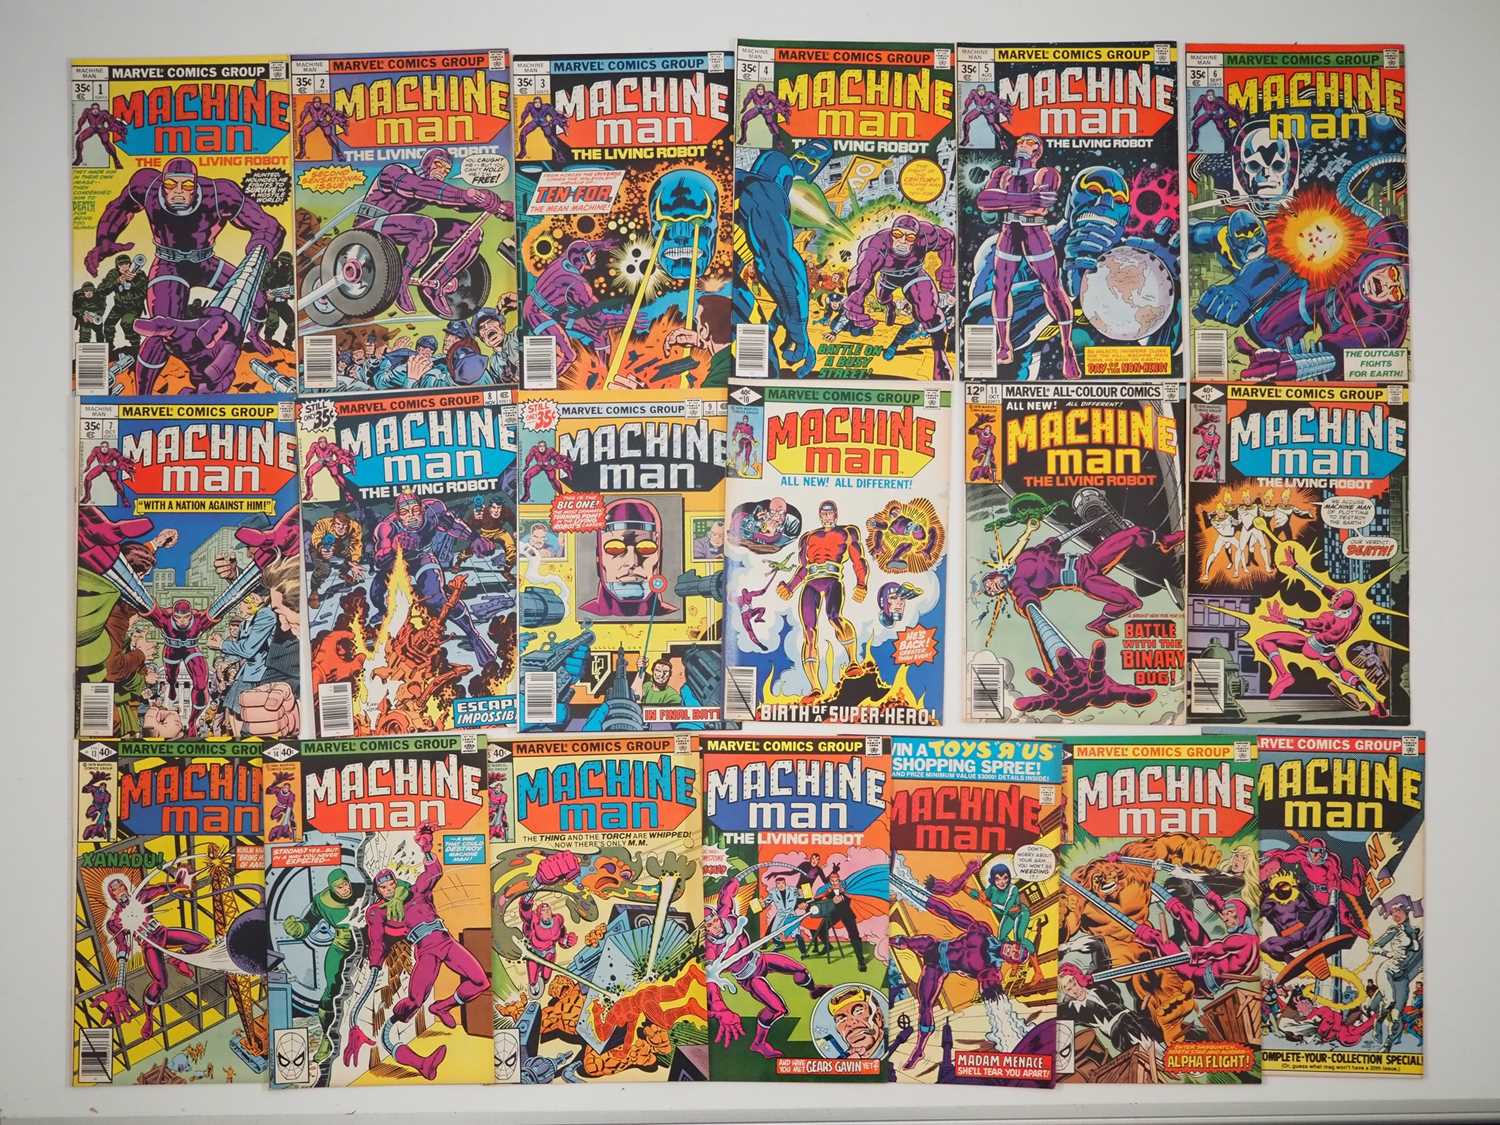 MACHINE MAN #1 to 19 (19 in Lot) - (1978/1981 - MARVEL - US & UK Price Variant) - Full complete